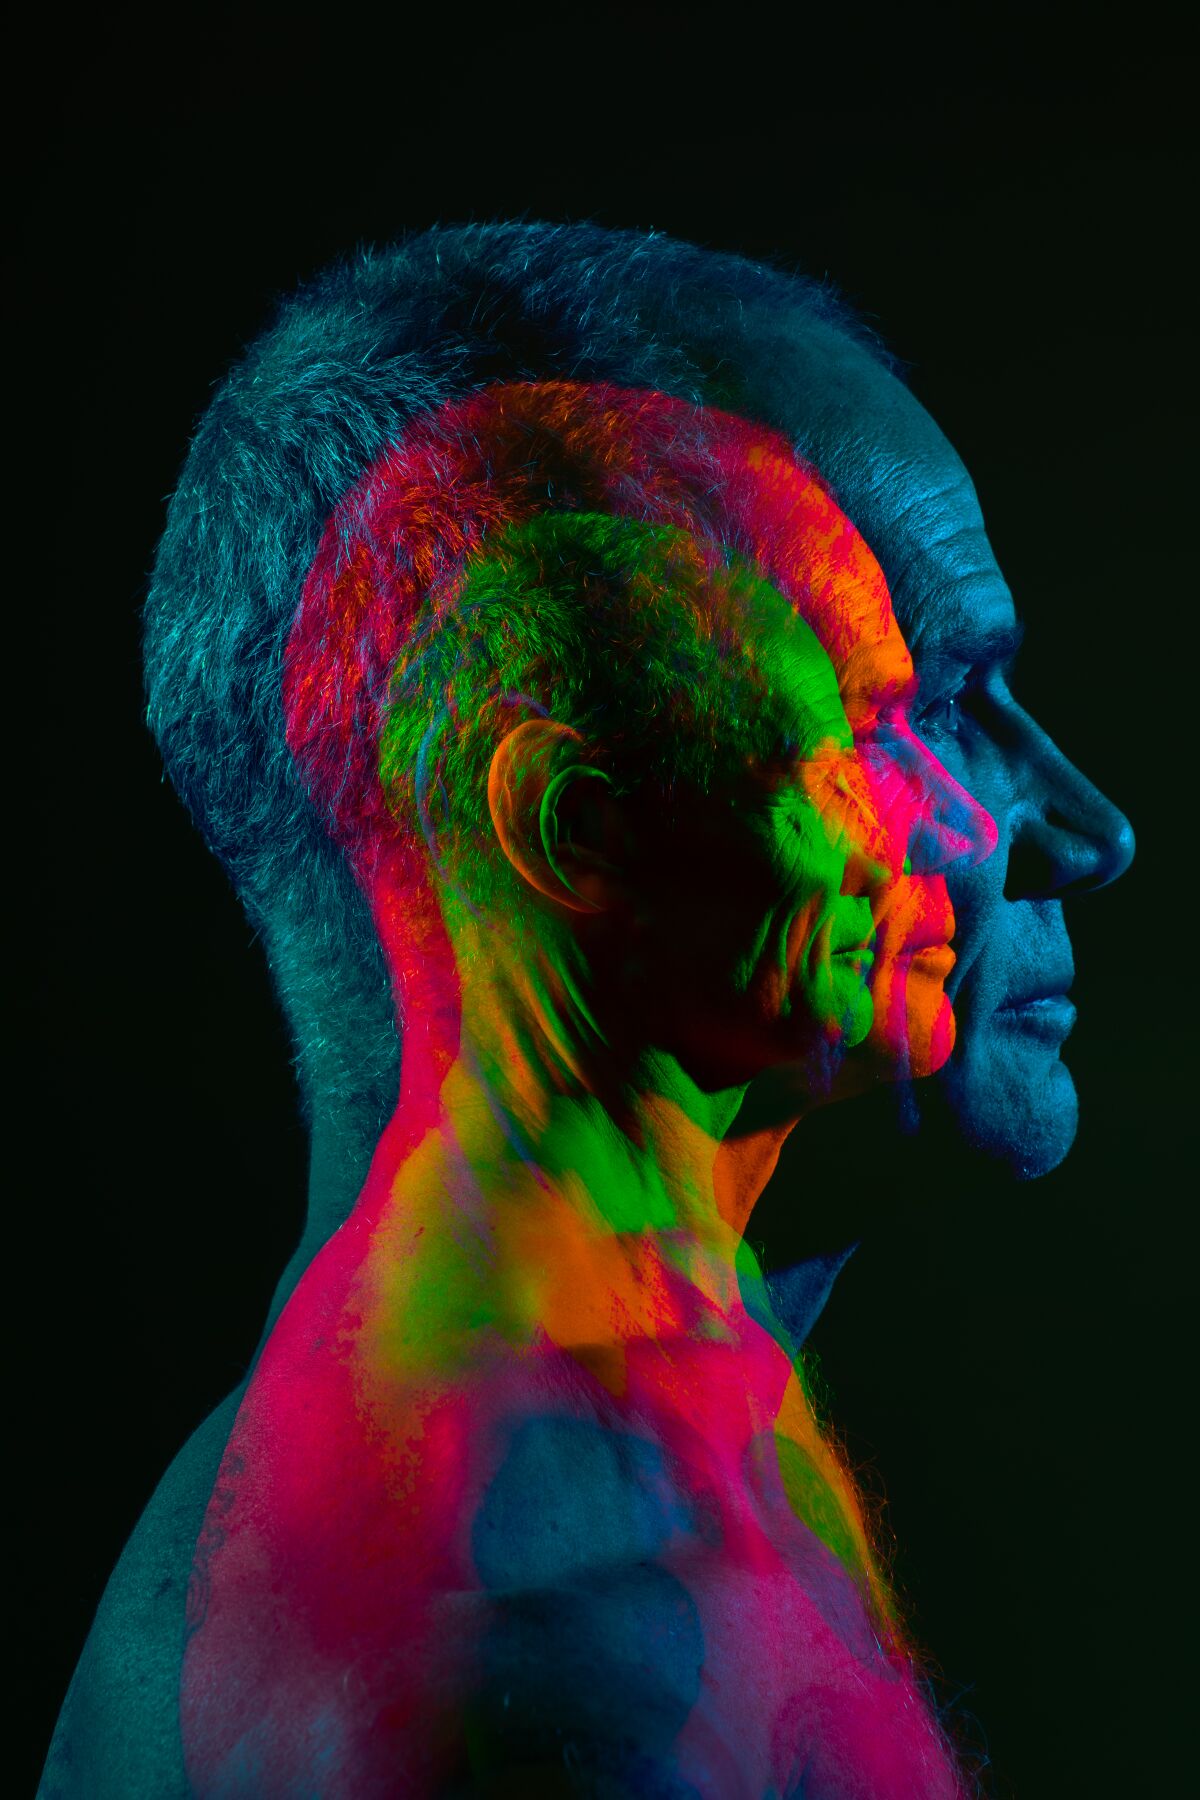 A multiple exposure of of the profile of a man.